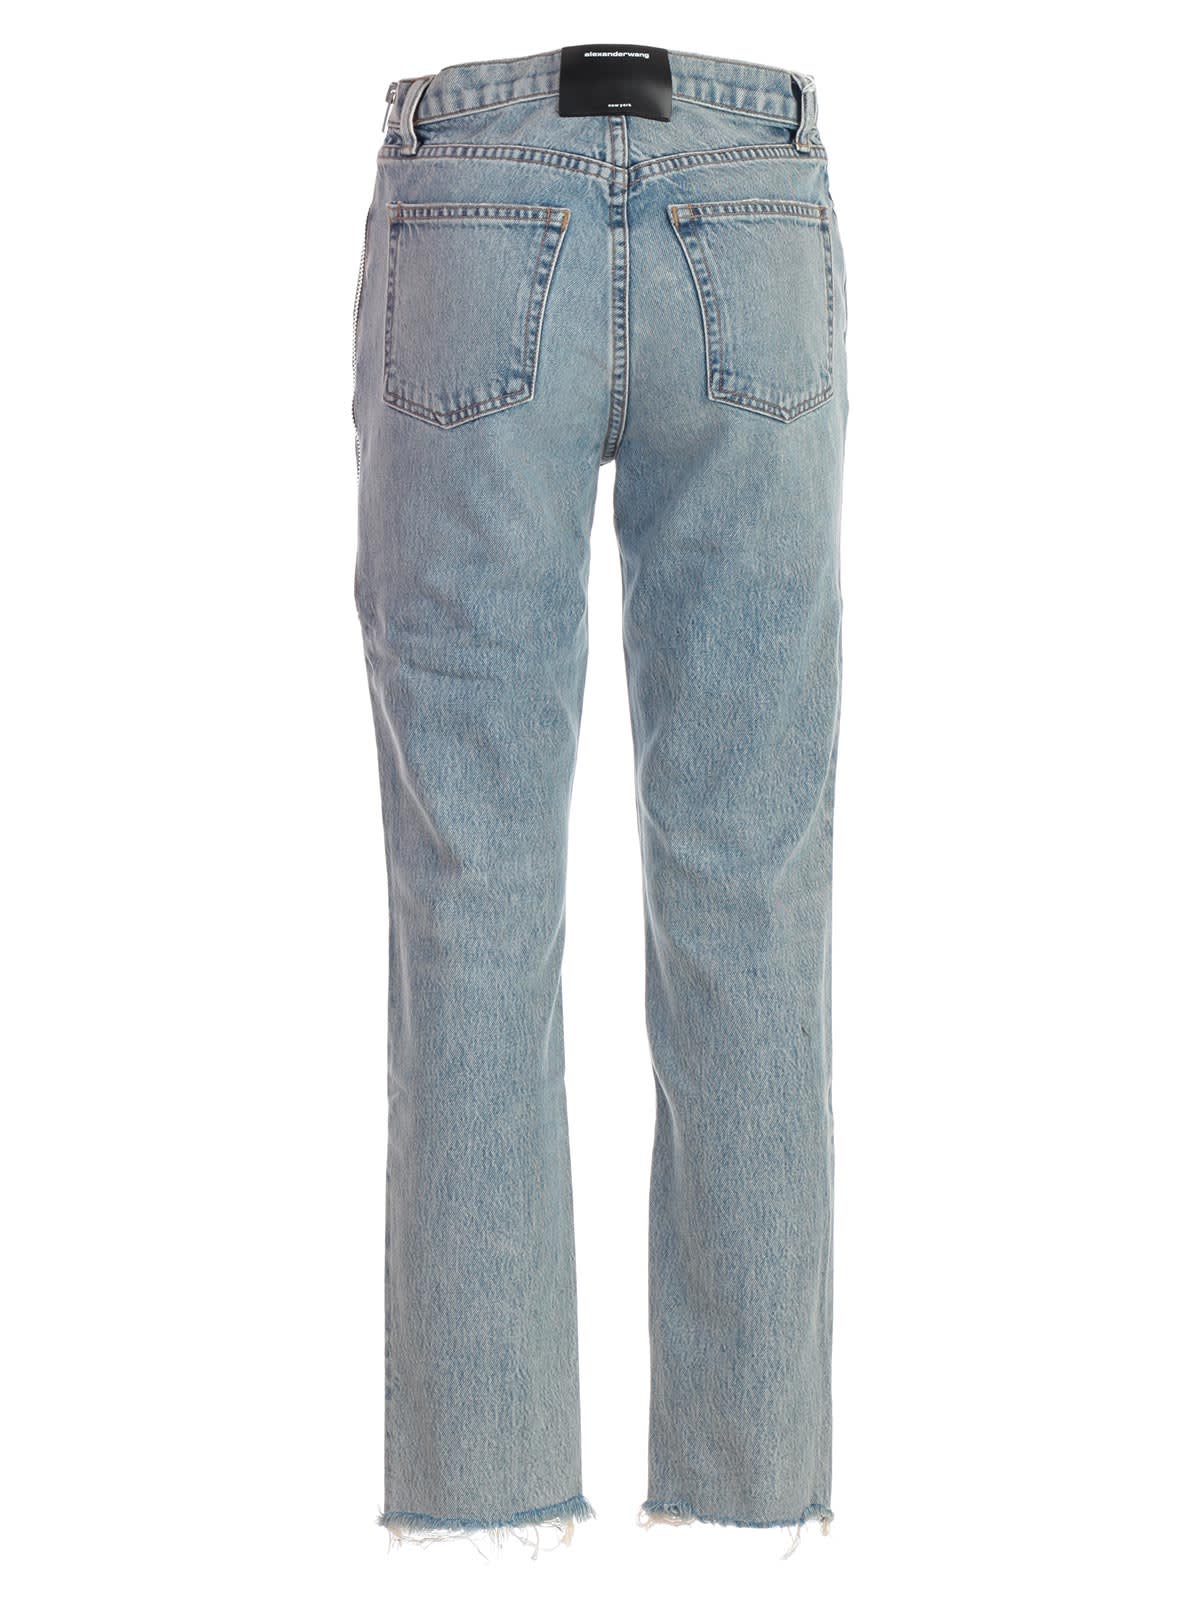 T by Alexander Wang T by Alexander Wang Jeans Side Zip - Vintage Wash ...